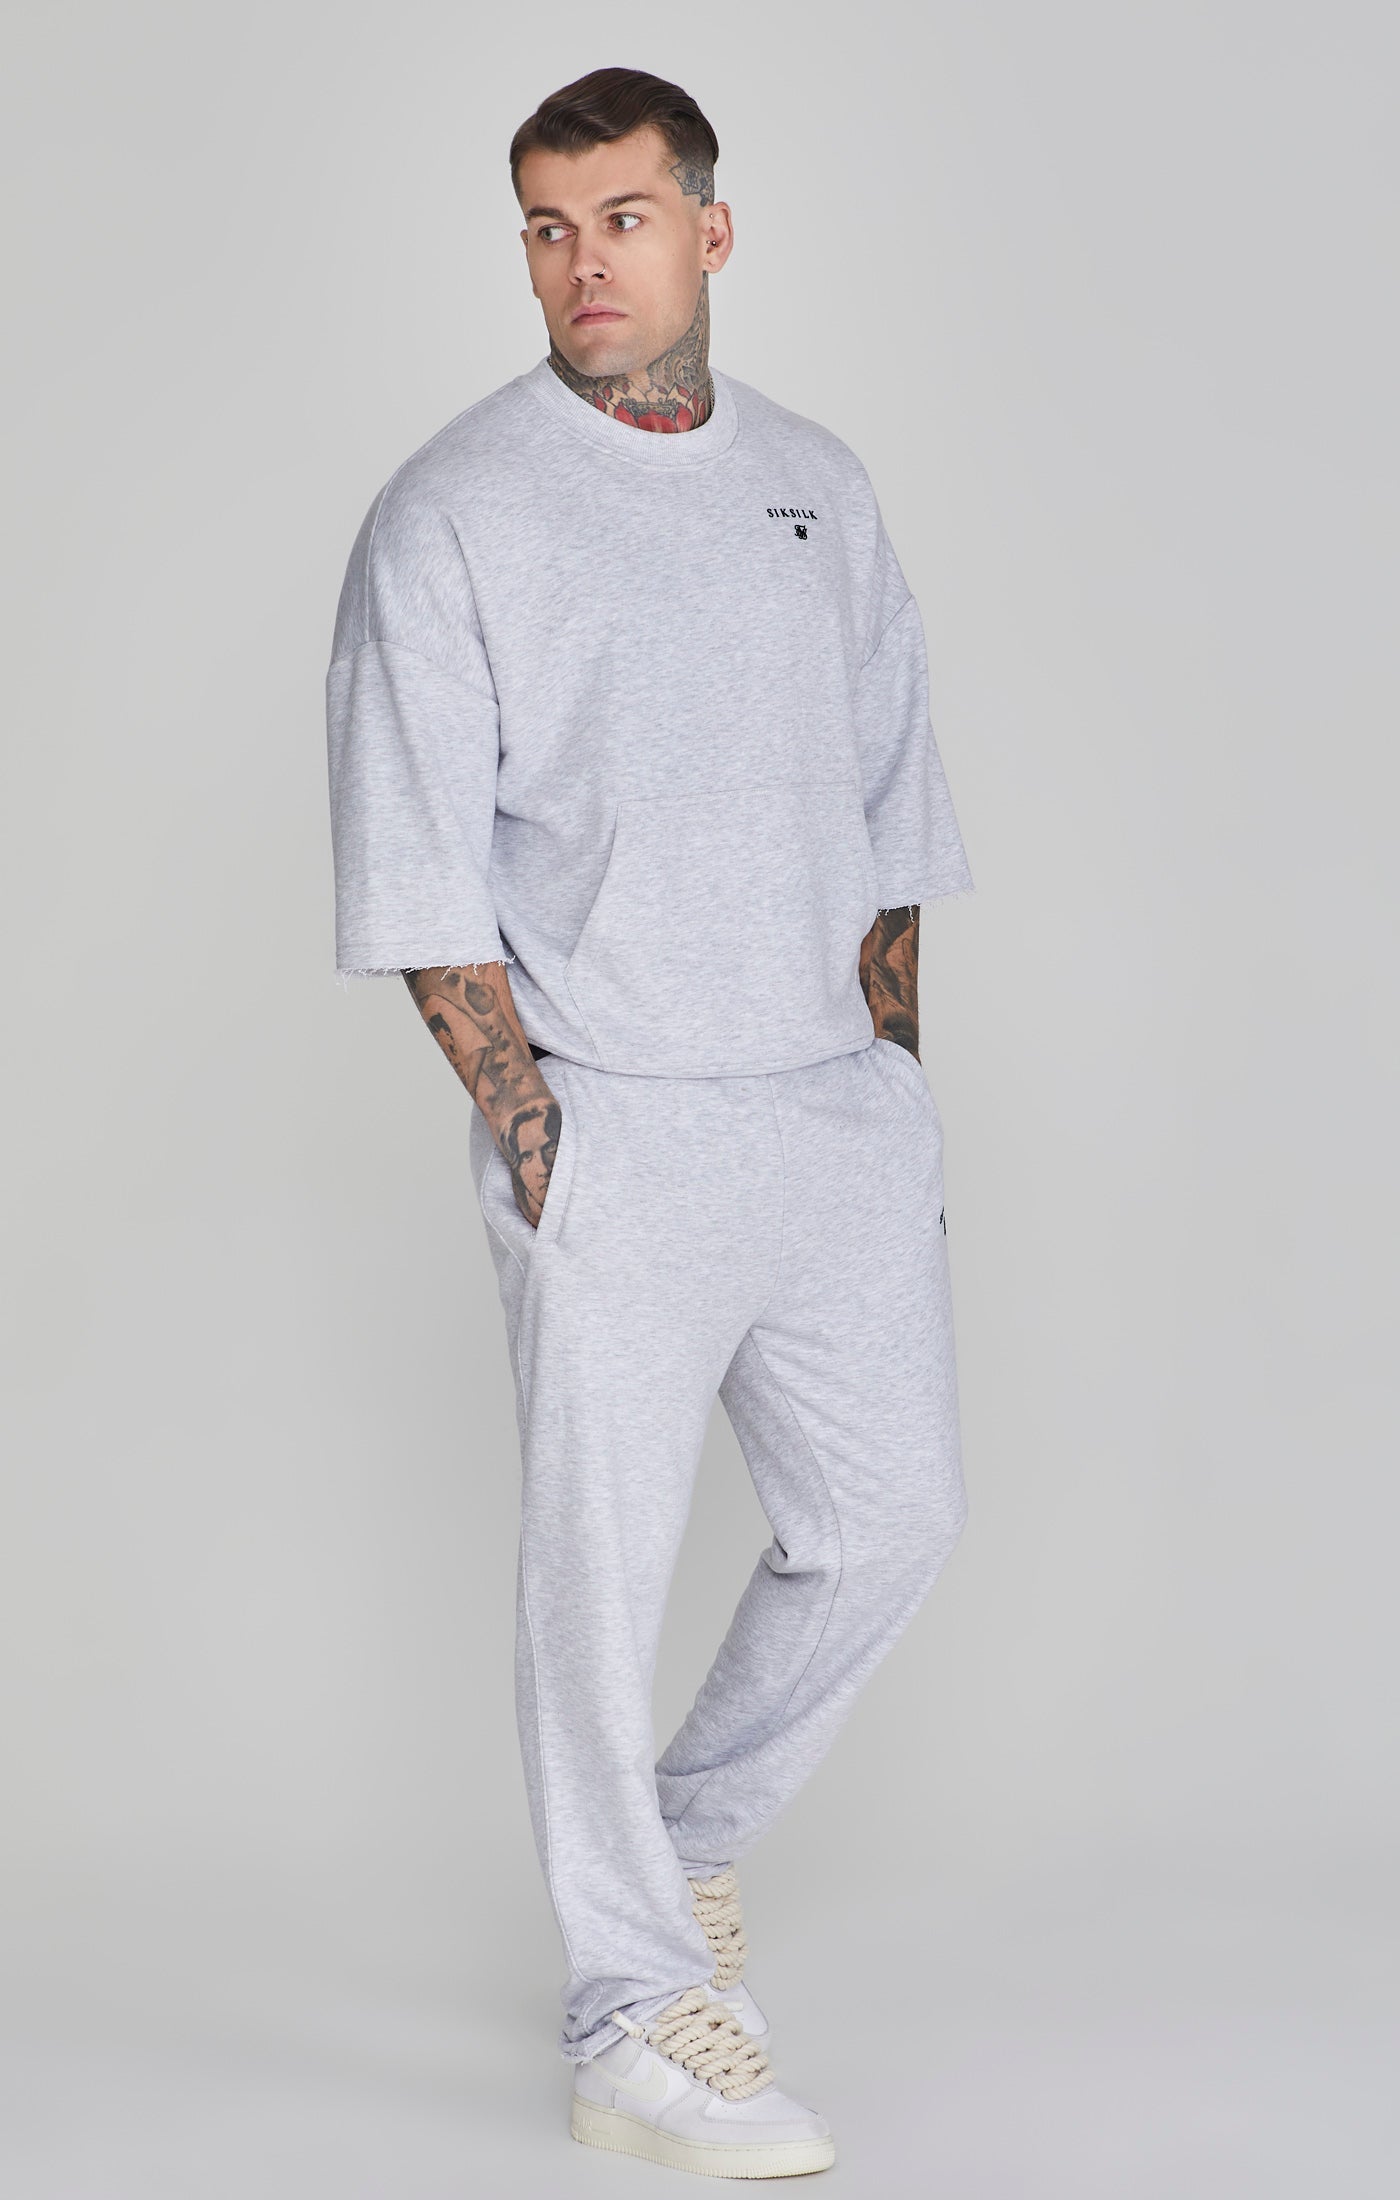 Siksilk - Relaxed Fit Joggers